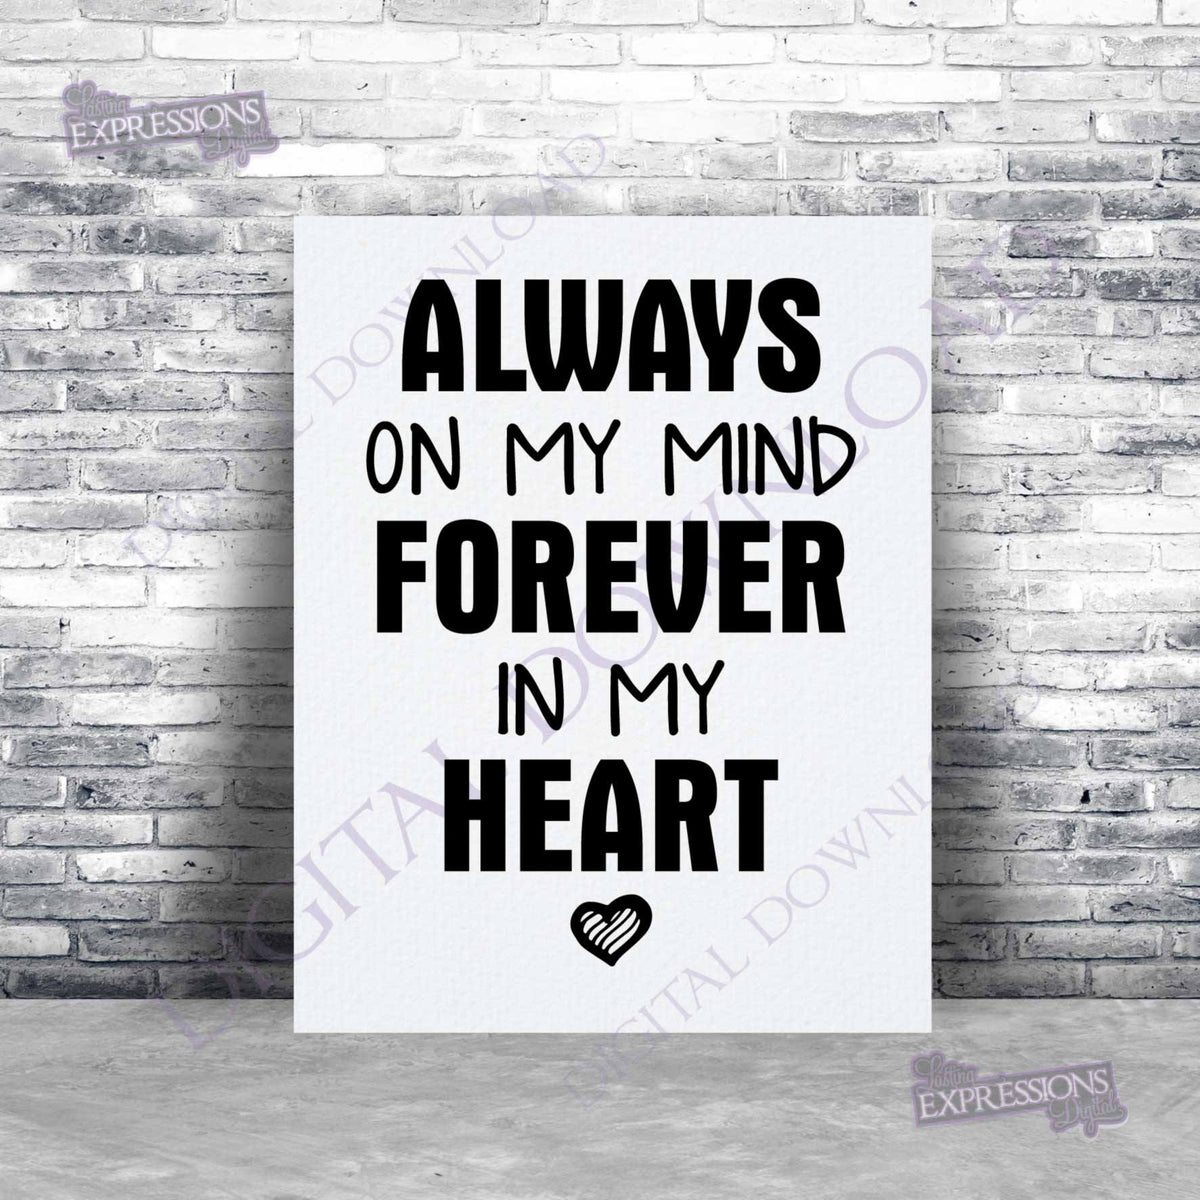 Collection 92+ Images always on my mind forever in my heart quote Excellent